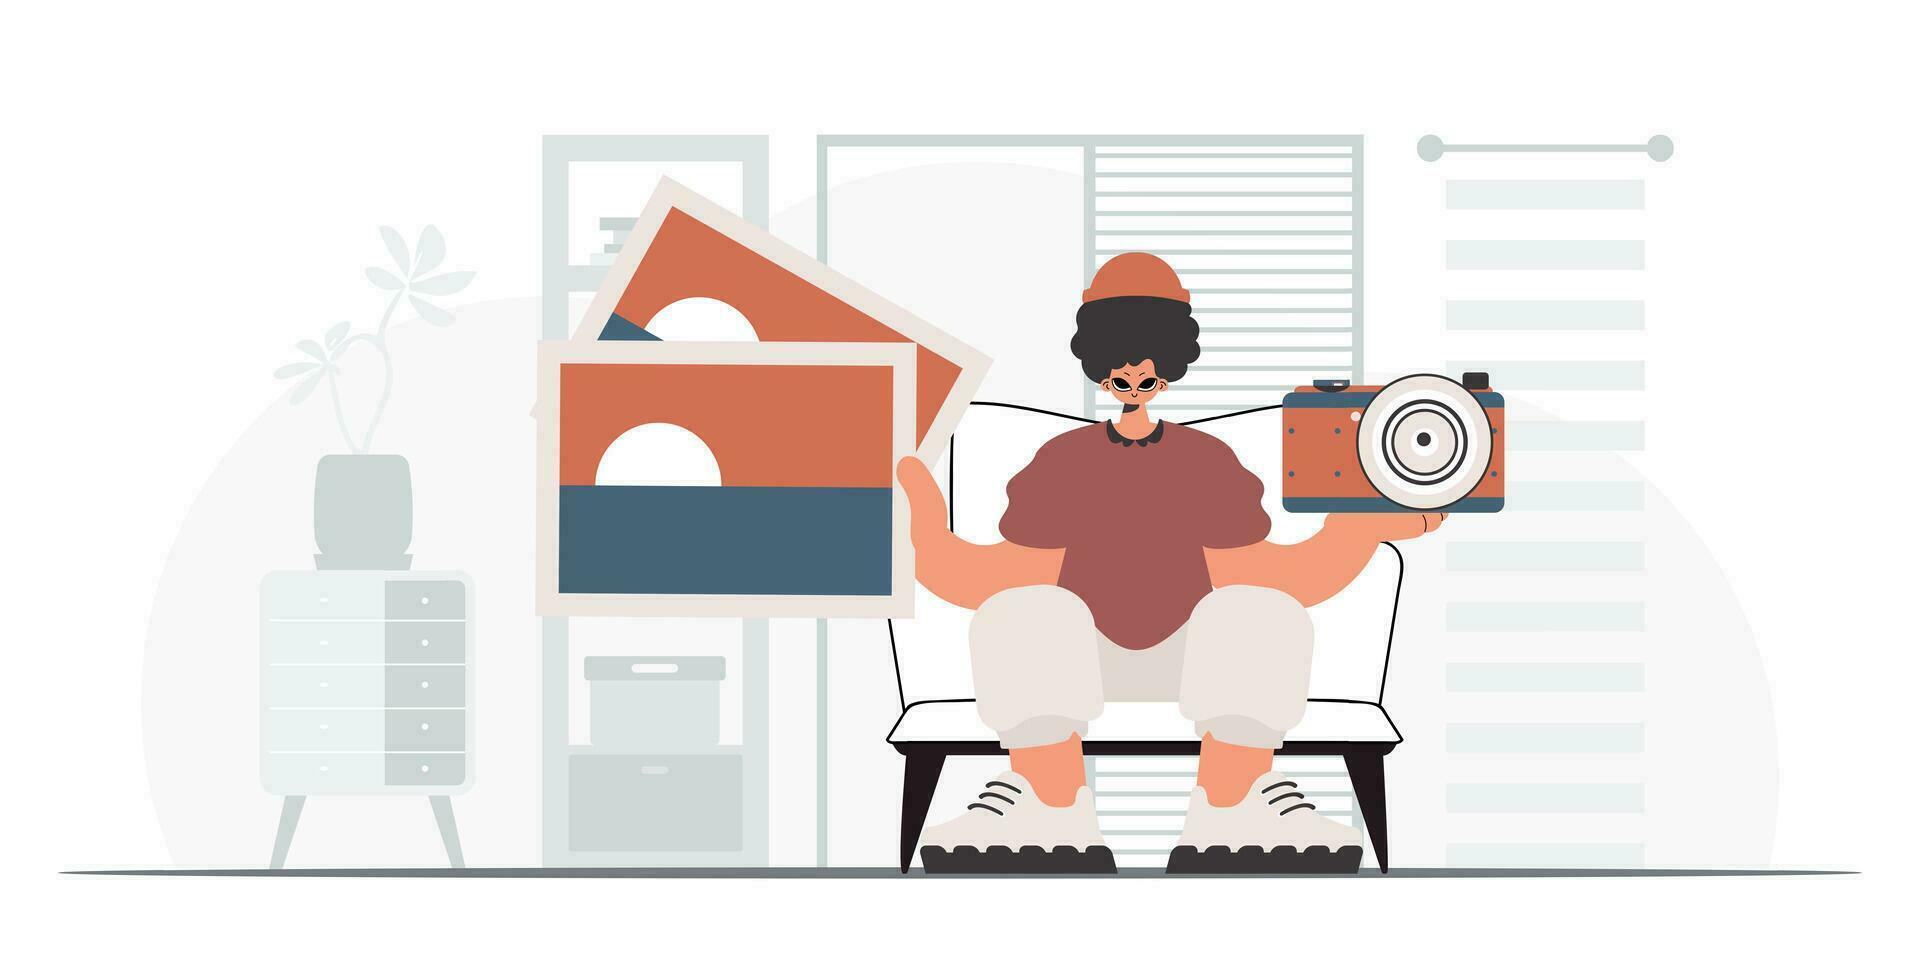 The individual holds a camera and photos in his hands. The concept of rest and travel. Trendy style, Vector Illustration